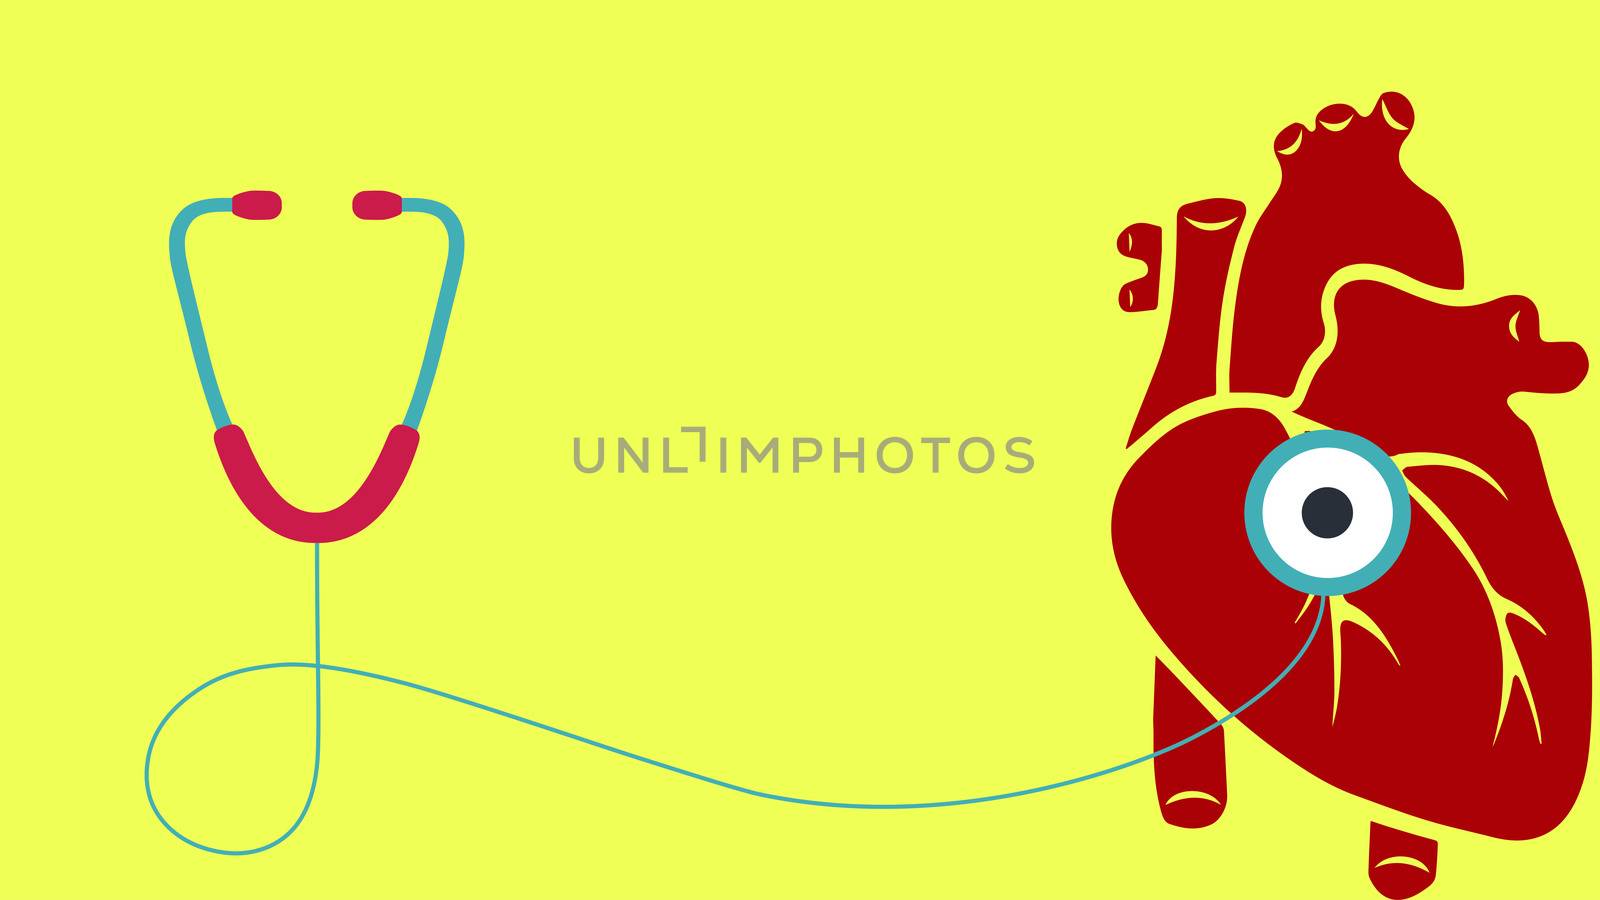 Health care background with heart stethoscope by Photochowk